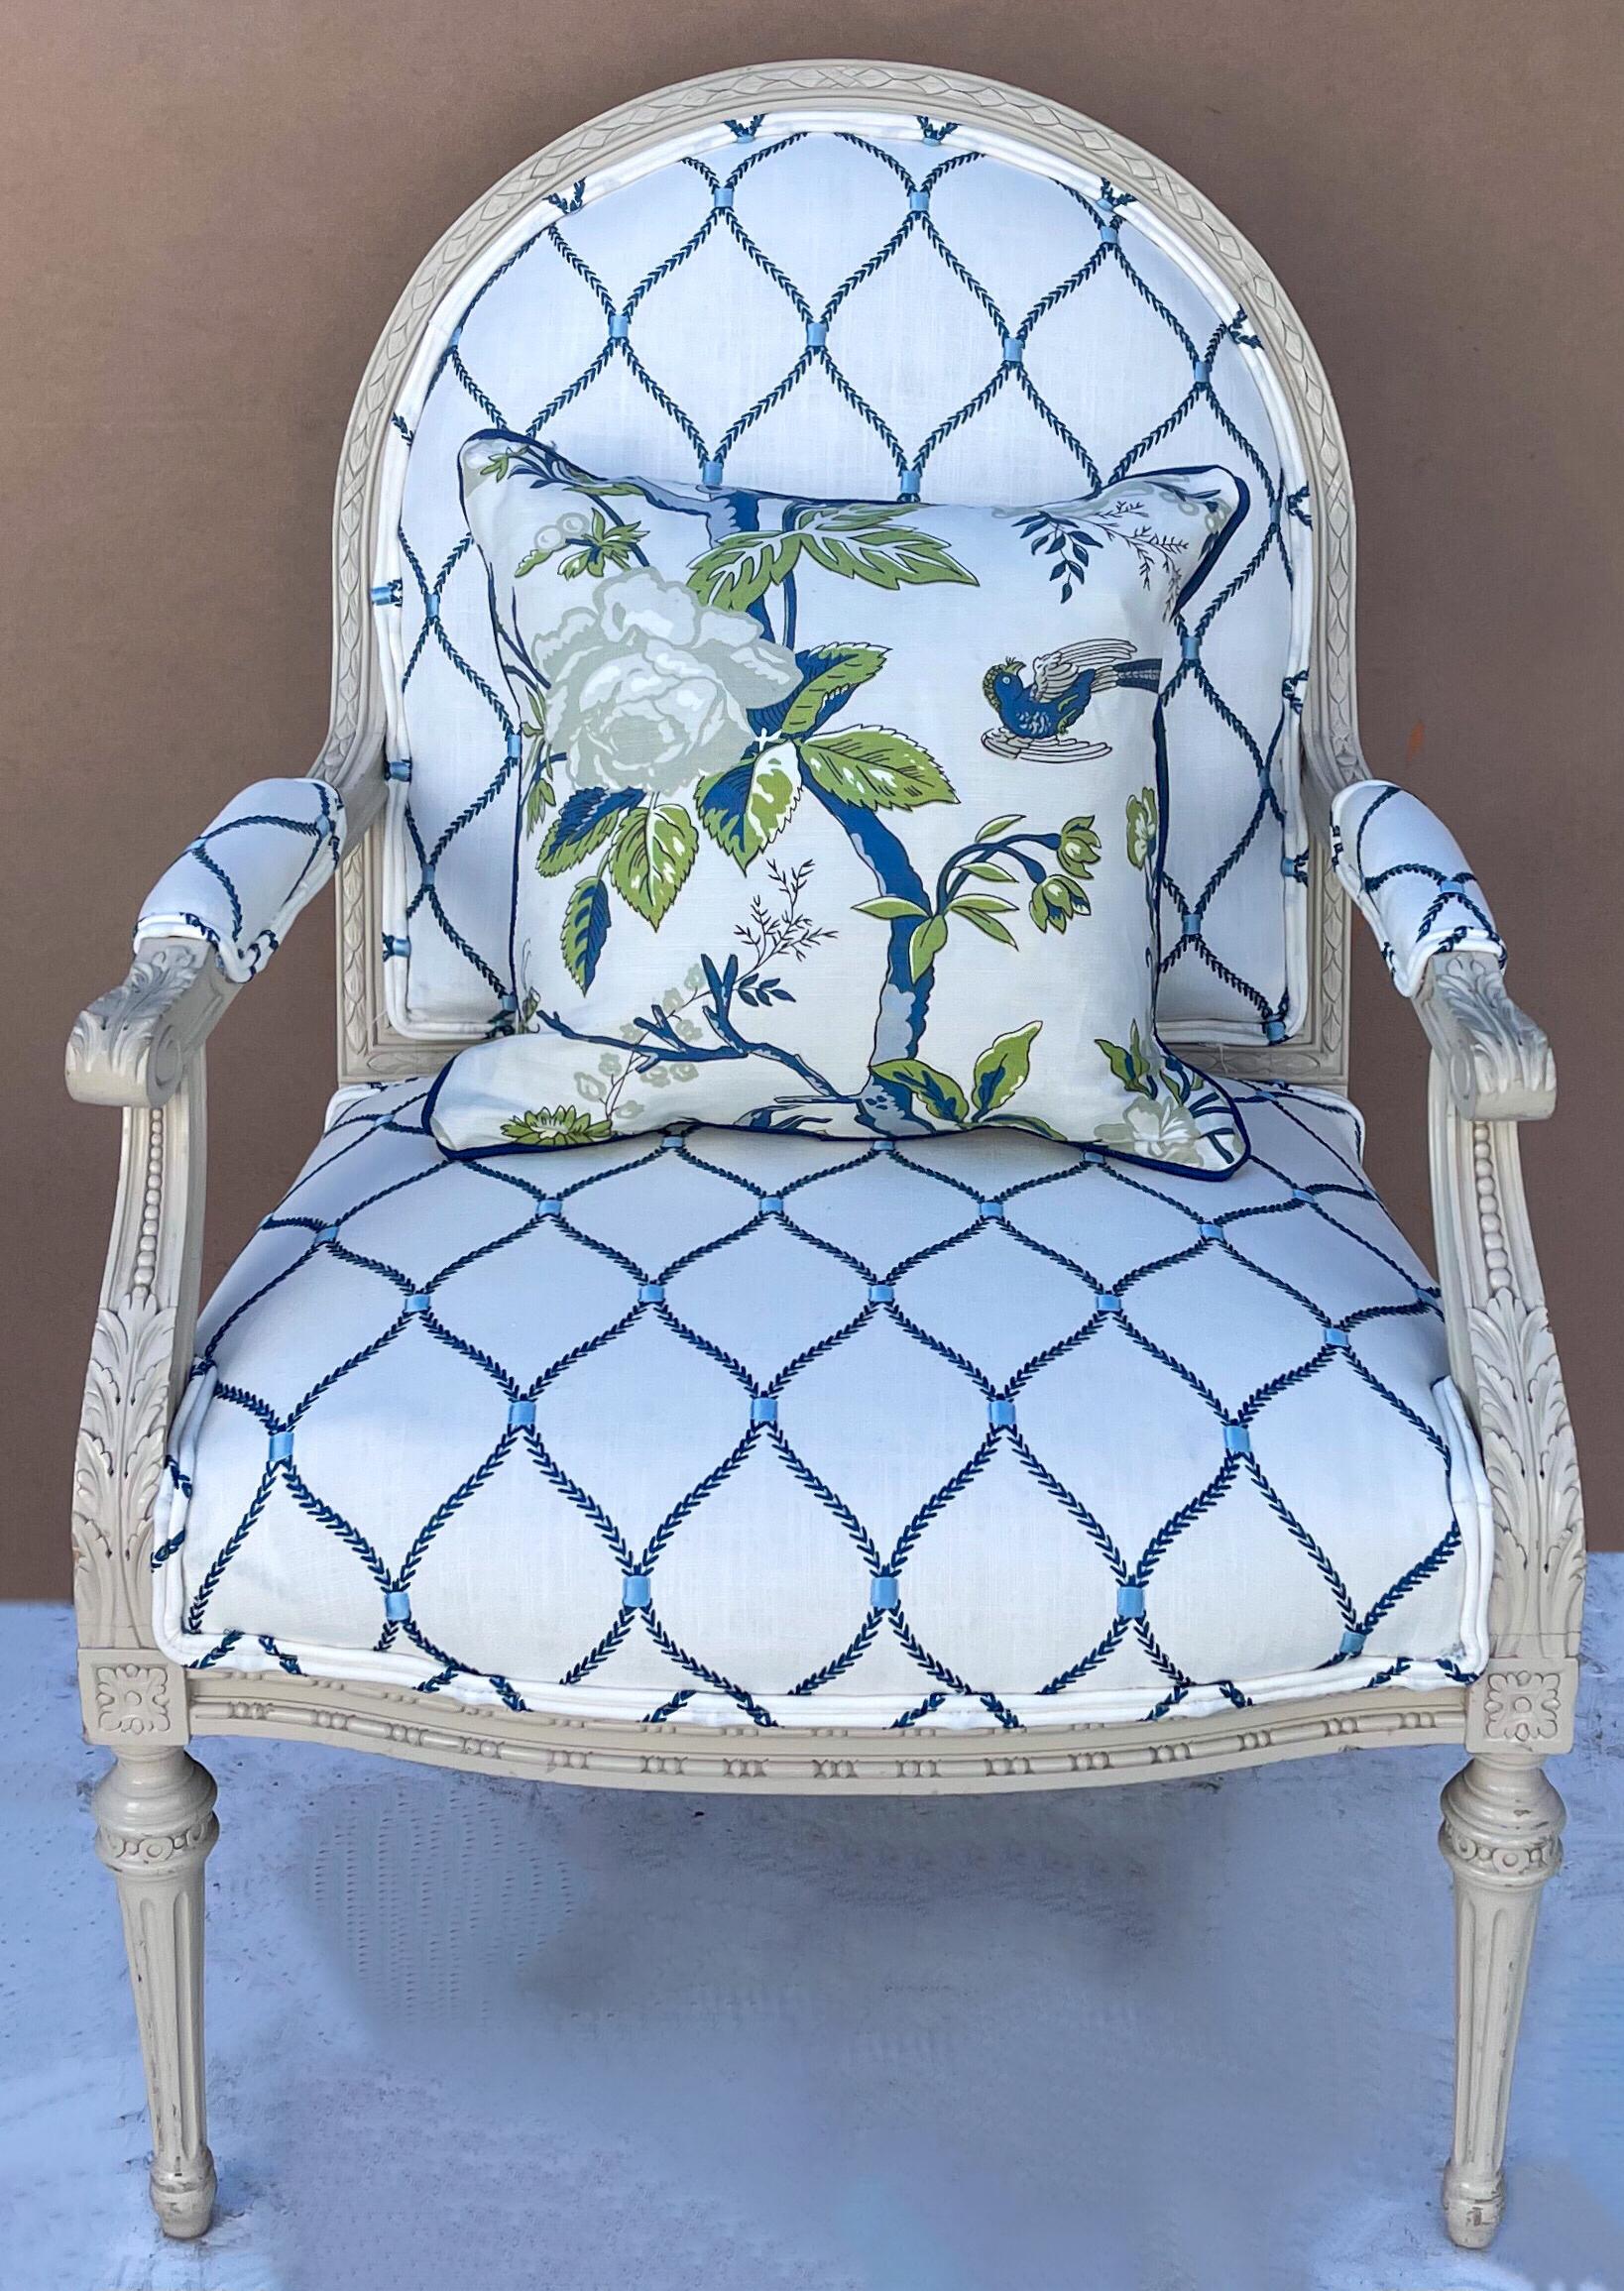 Upholstery 20th Century Carved French Style Chairs In Blue And White Travers Fabric, Pair For Sale